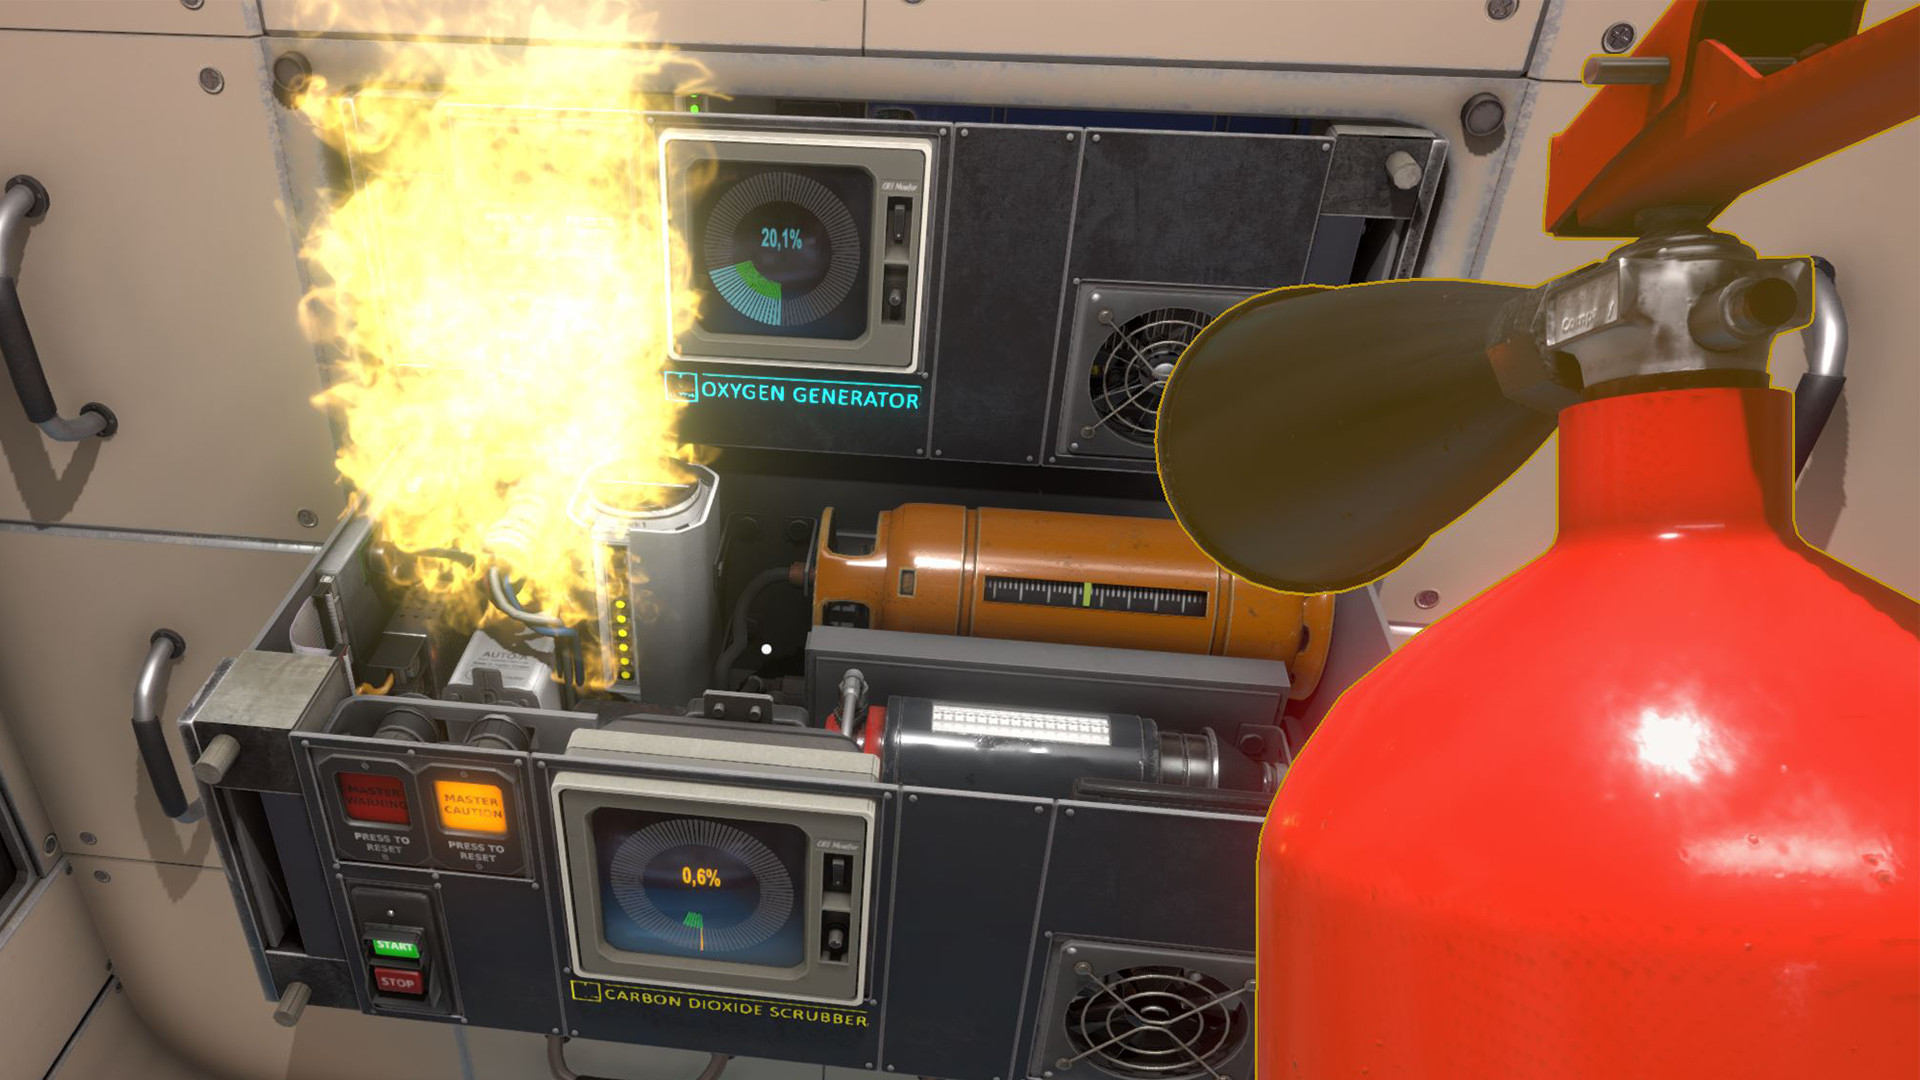  Repair your escape pod or die trying in this tense space survival sim 